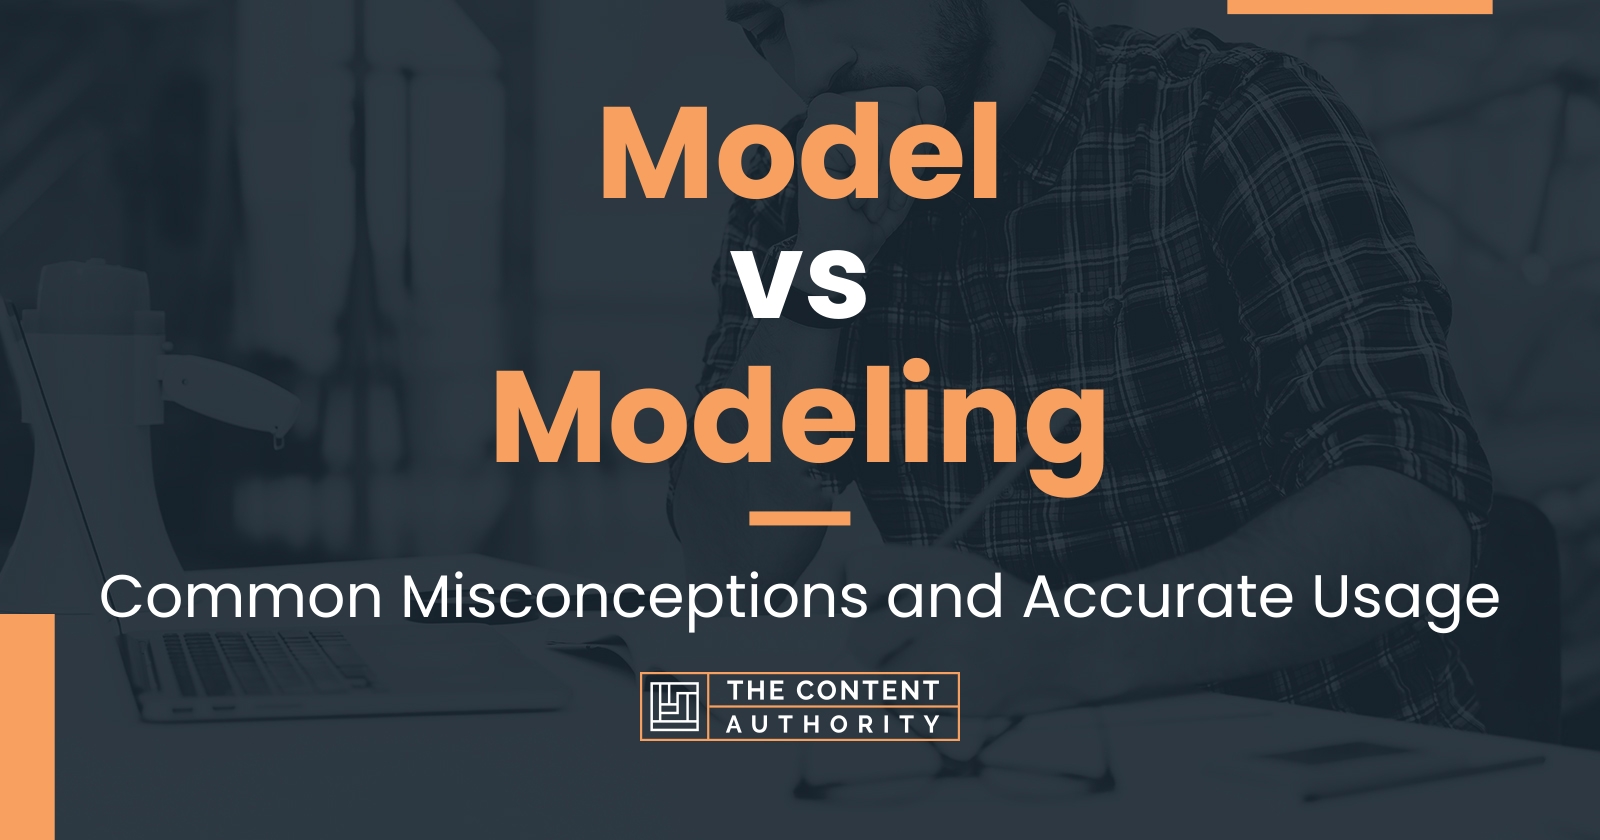 Model vs Modeling: Common Misconceptions and Accurate Usage